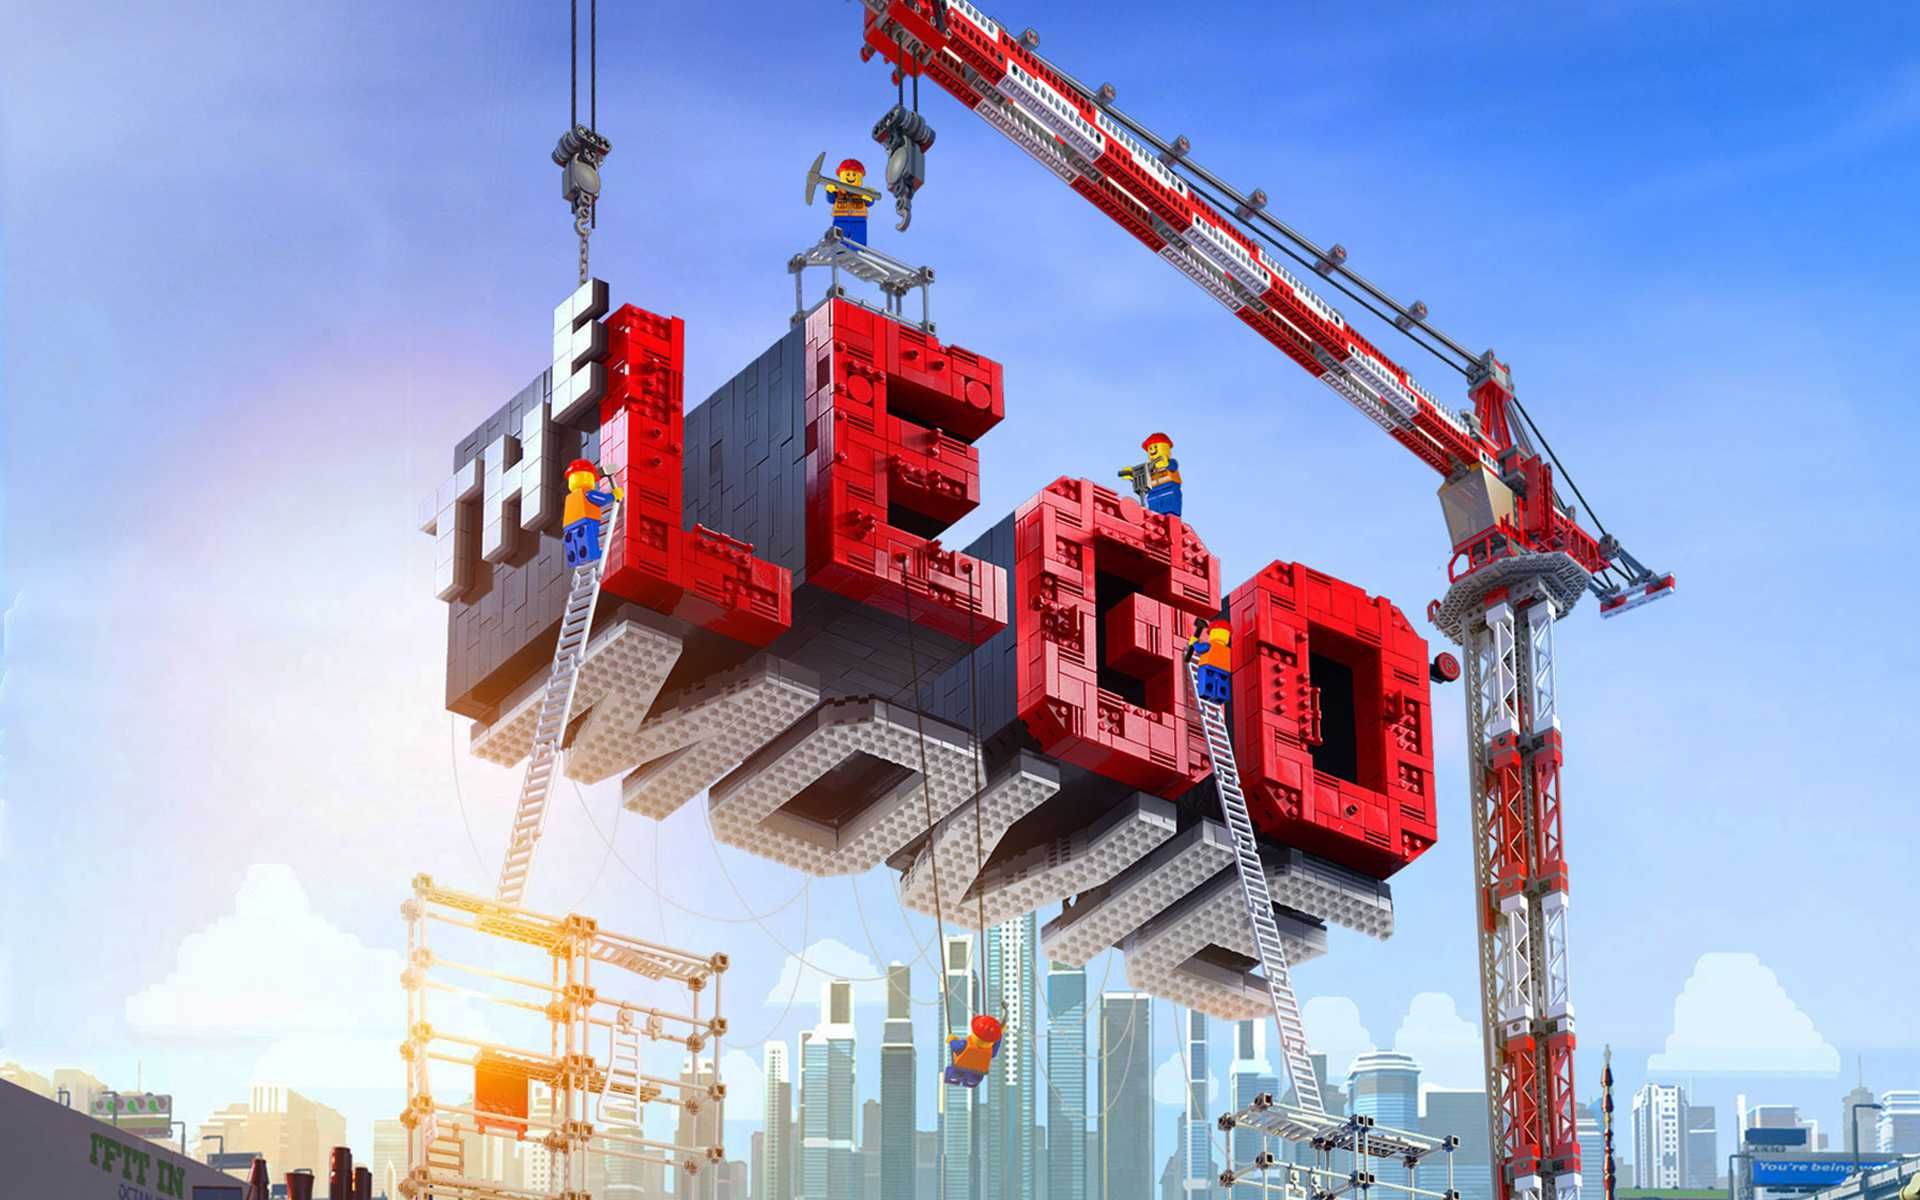 Animated+advertisement+for+the+new+film+The+Lego+Movie.+